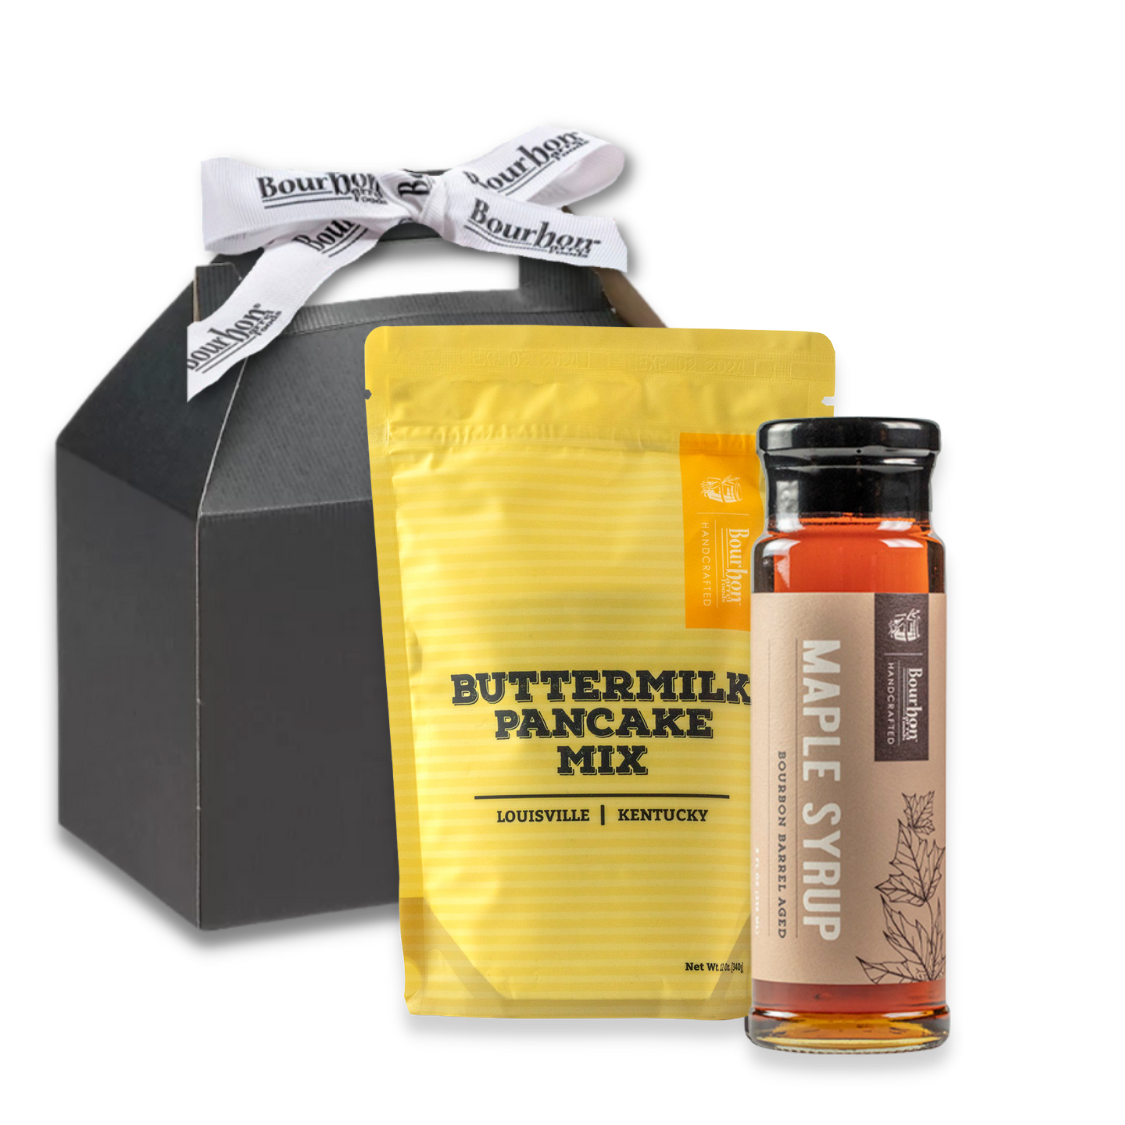 Early Riser Specialty Coffee Gift Set - Pappy & Company